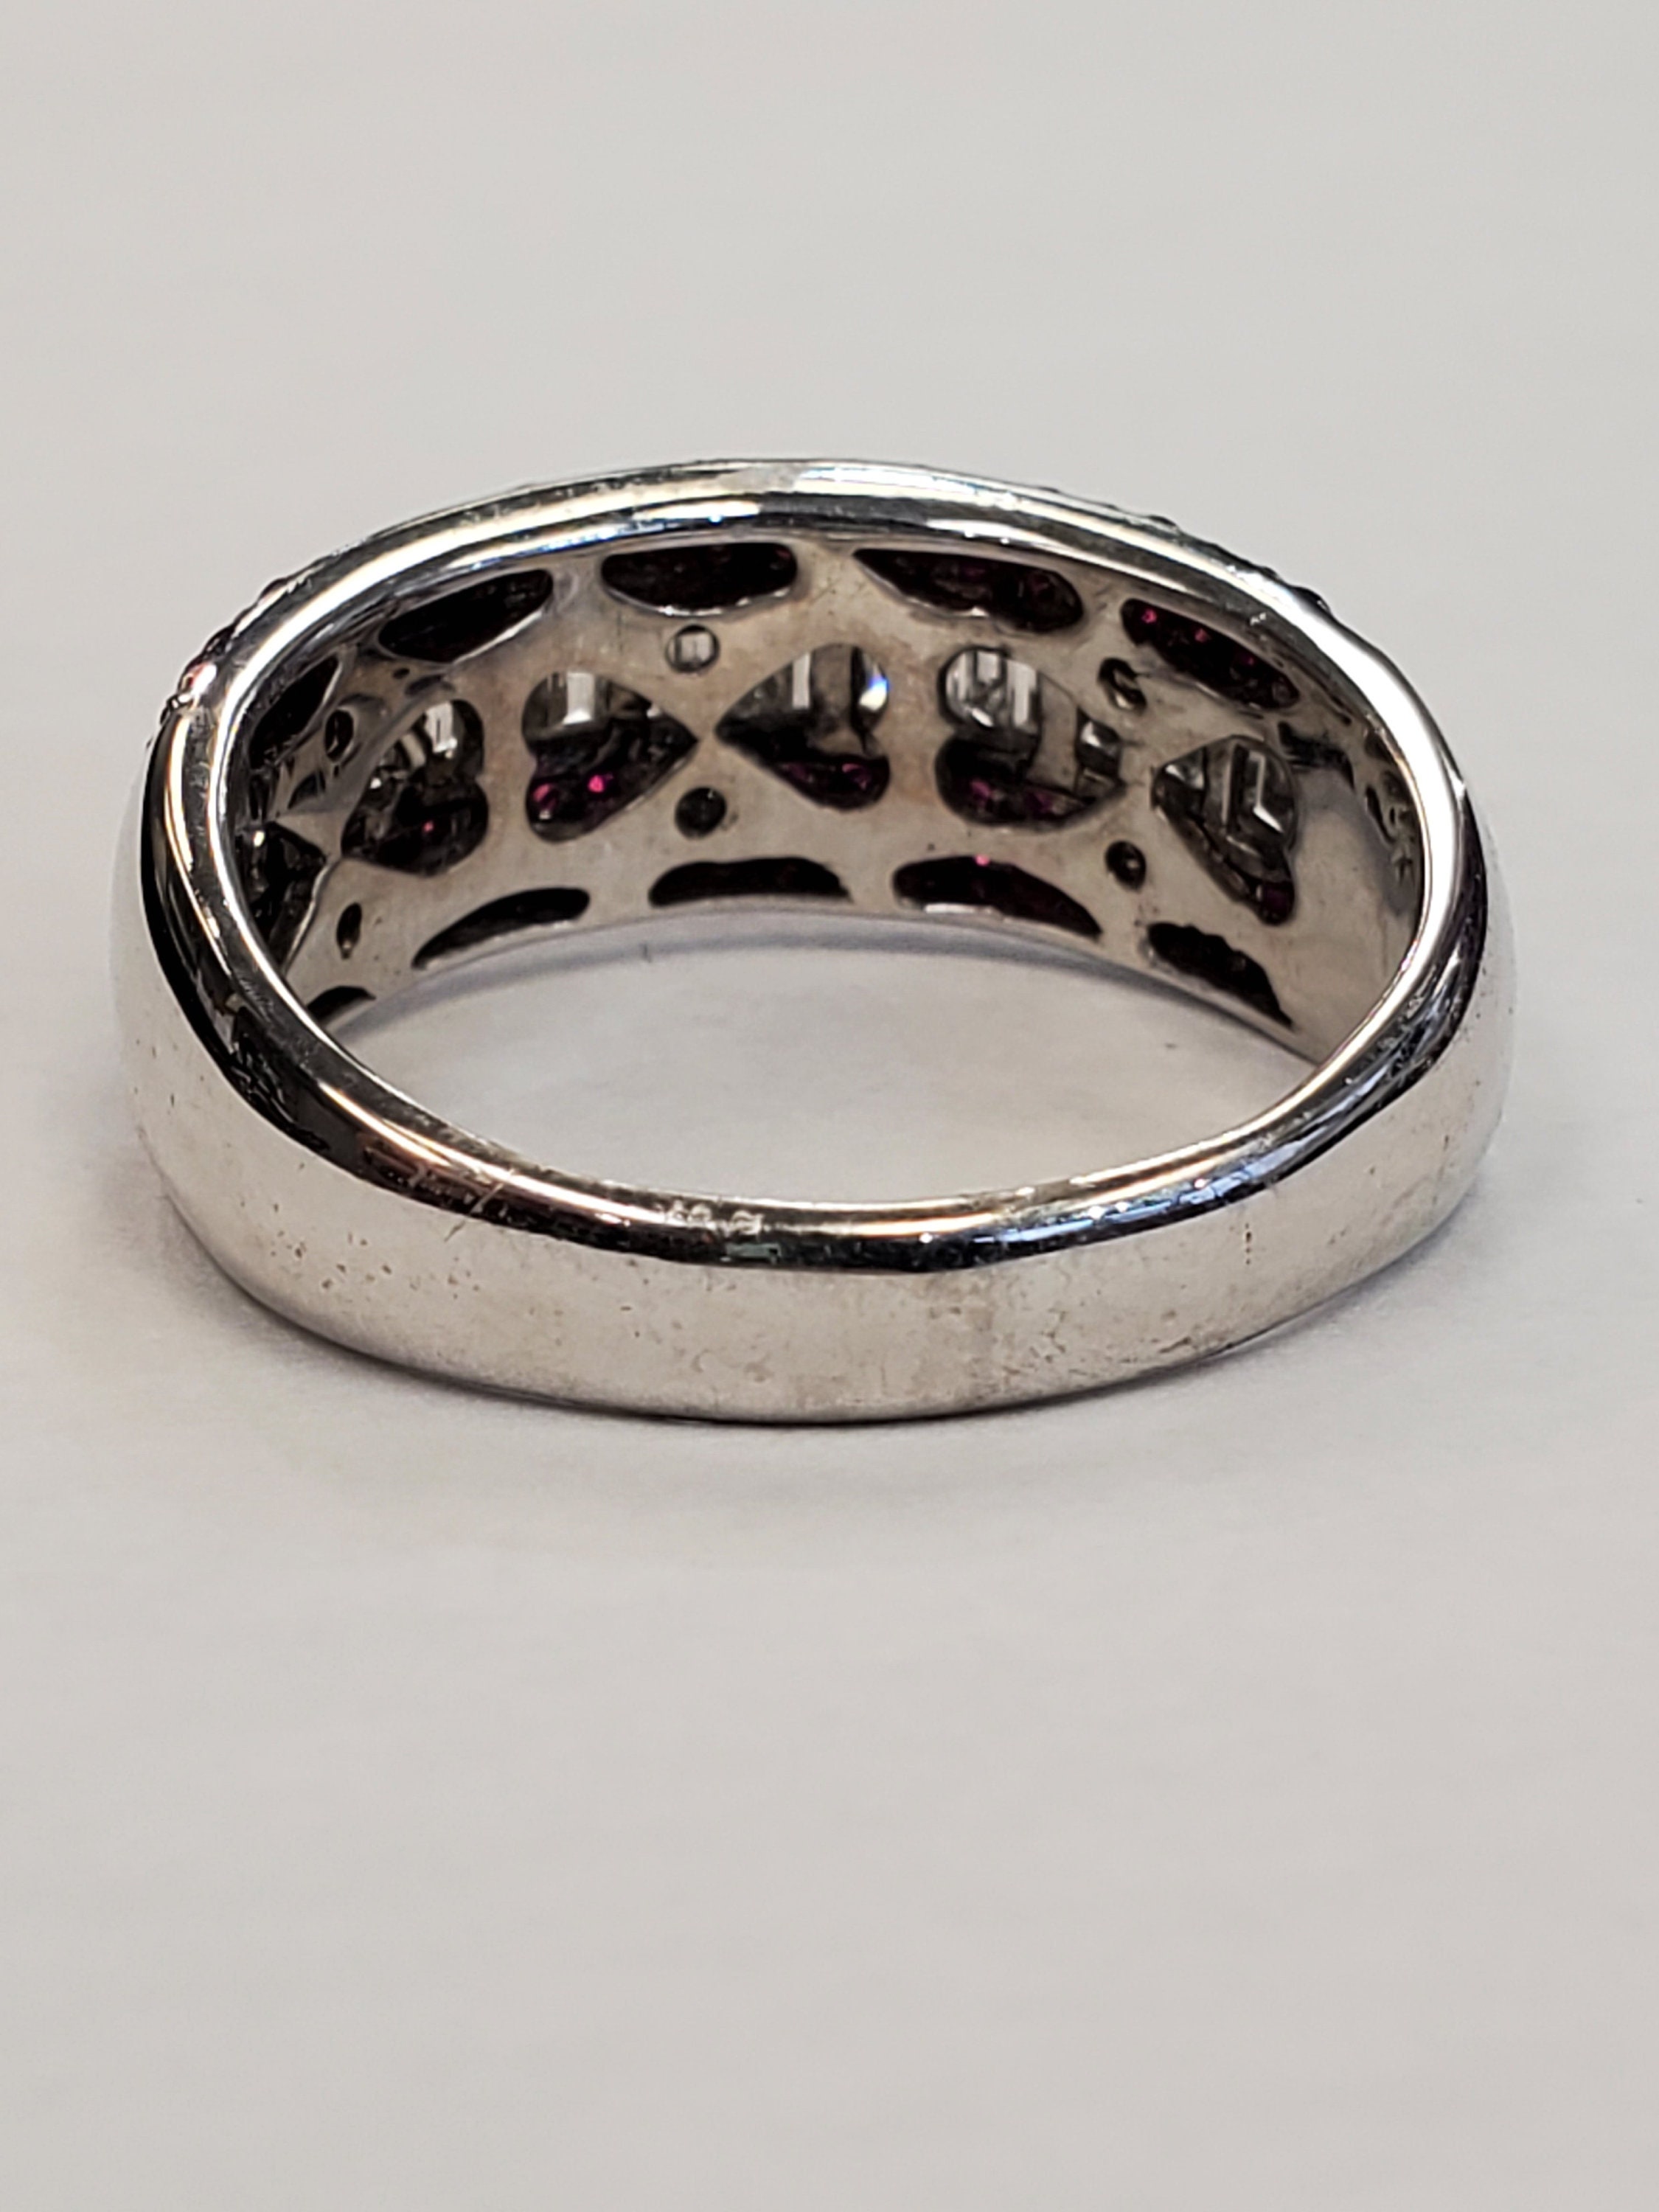 Product Image for 1.14cttw baguette diamond and .50cttw ruby 18k white gold band ring size 10.5